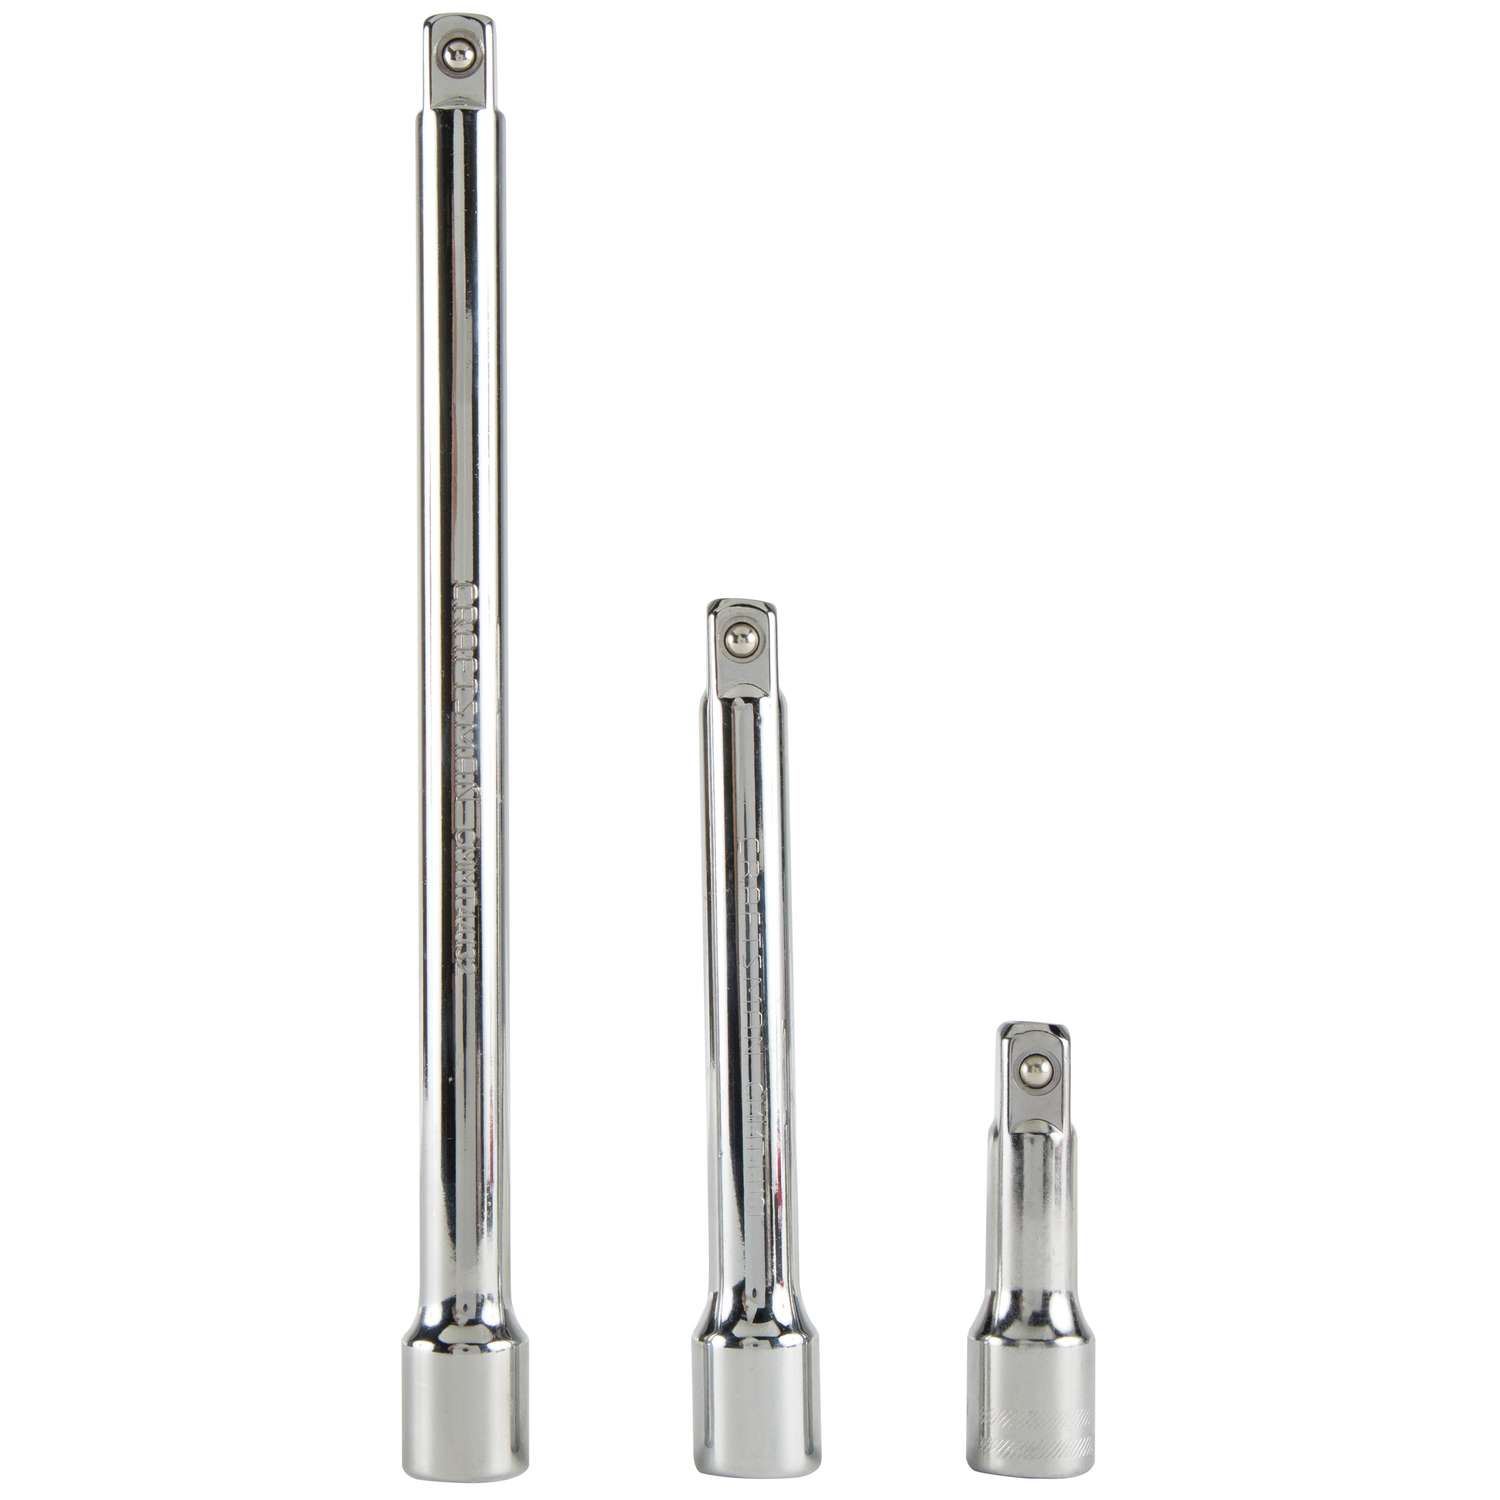 Craftsman 3/8 in. drive Extension Bar Set 4 pc - Ace Hardware